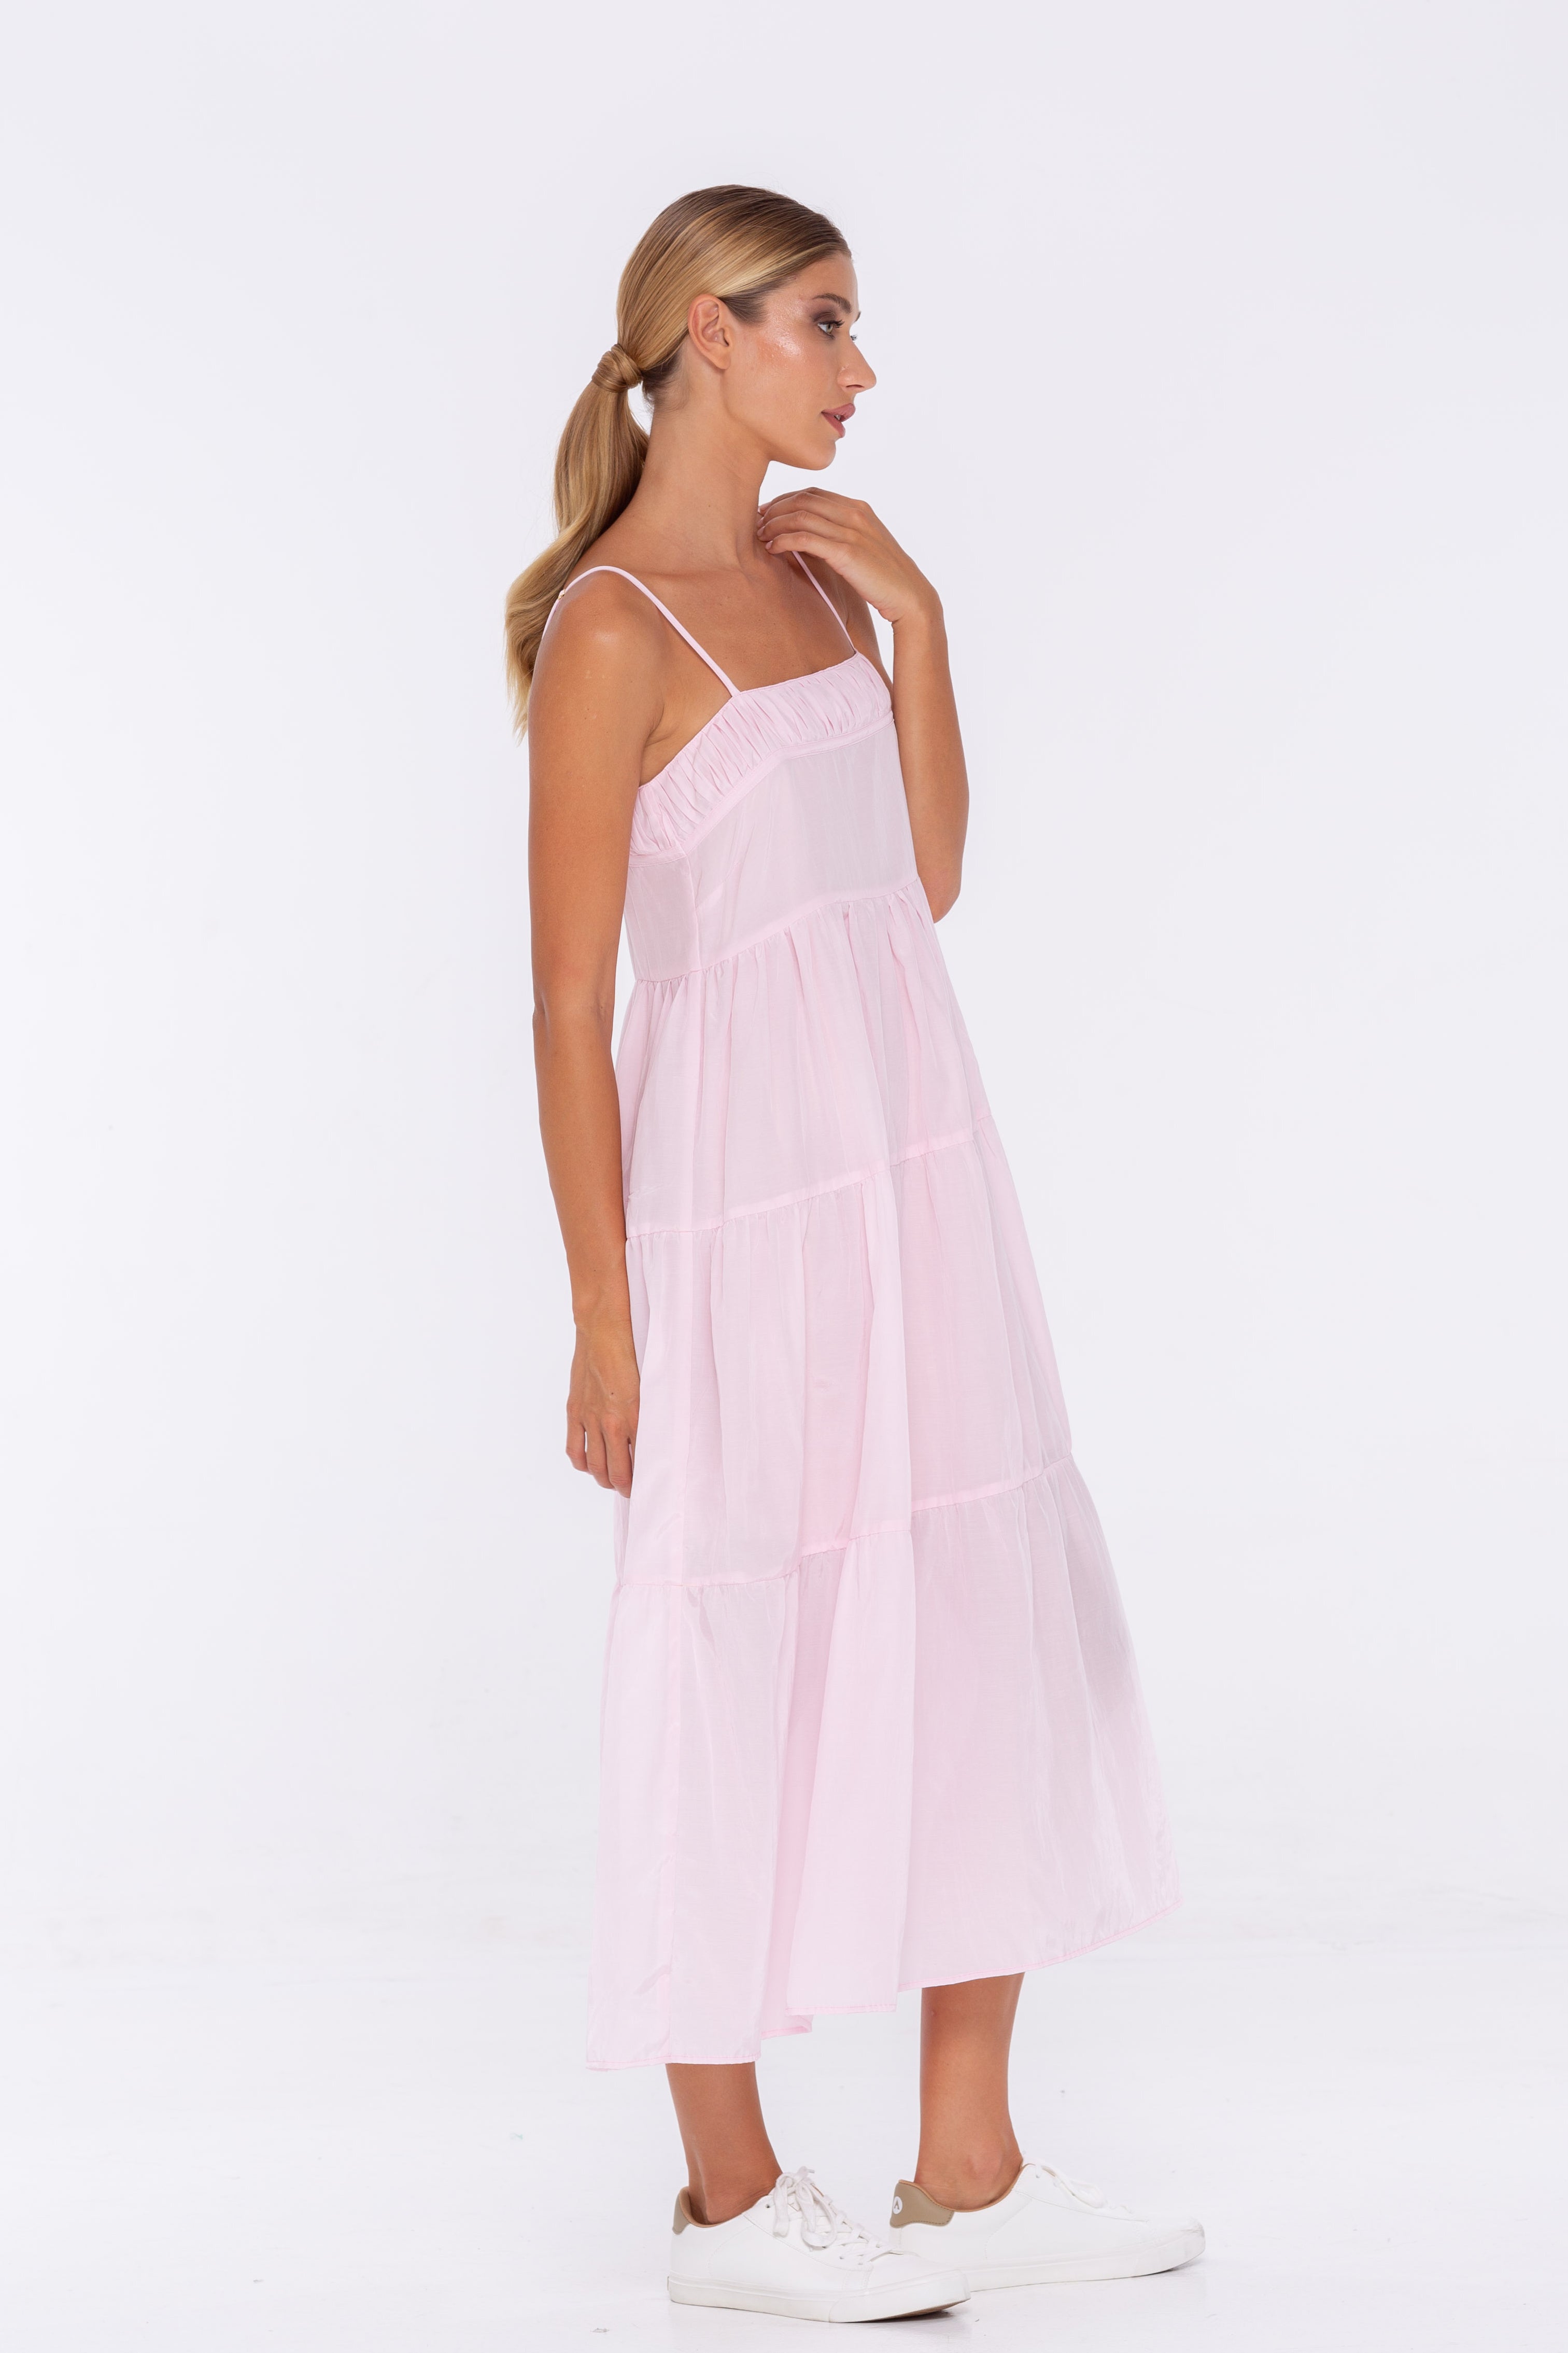 Fly To You Dress - Ice Pink